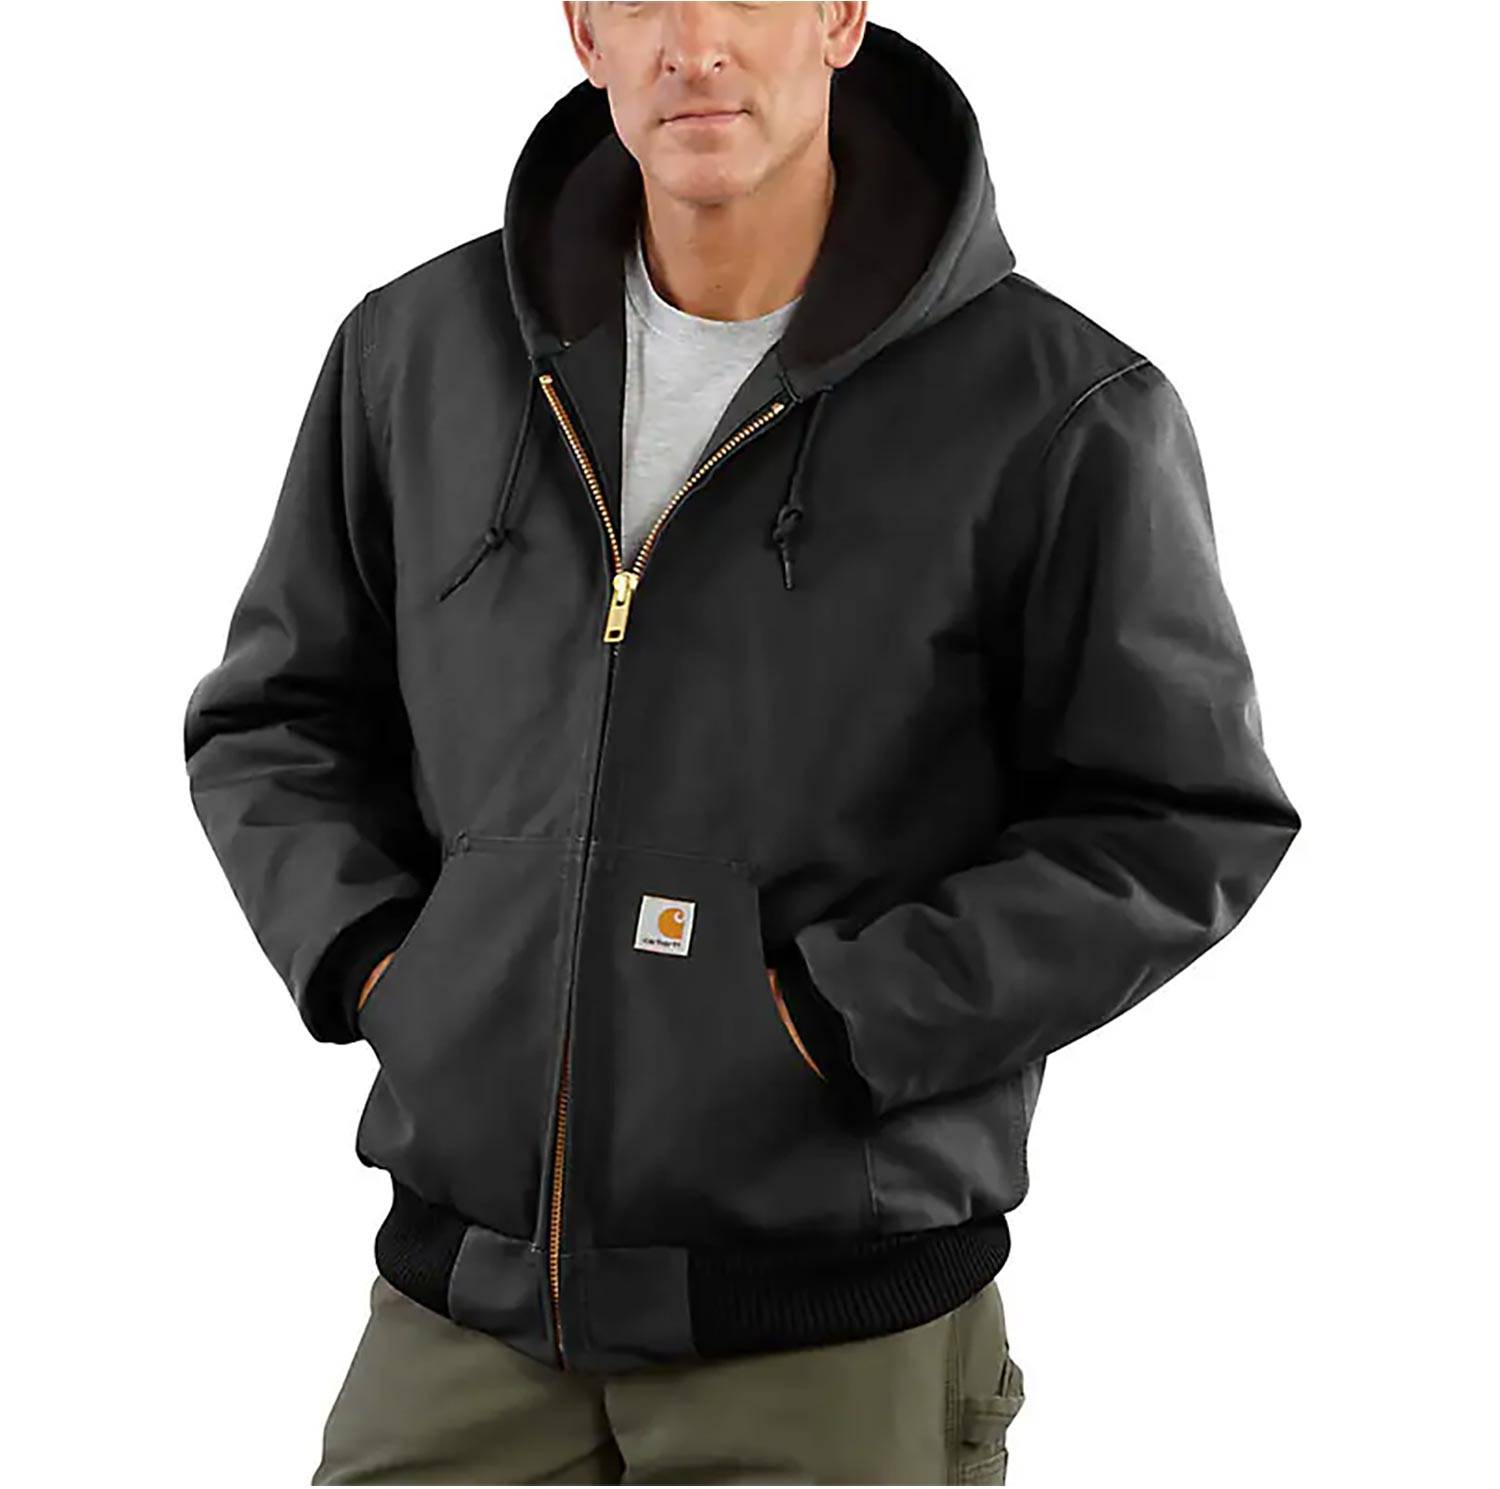 CARHARTT MEN'S QUILTED FLANNEL LINED DUCK ACTIVE JACKET